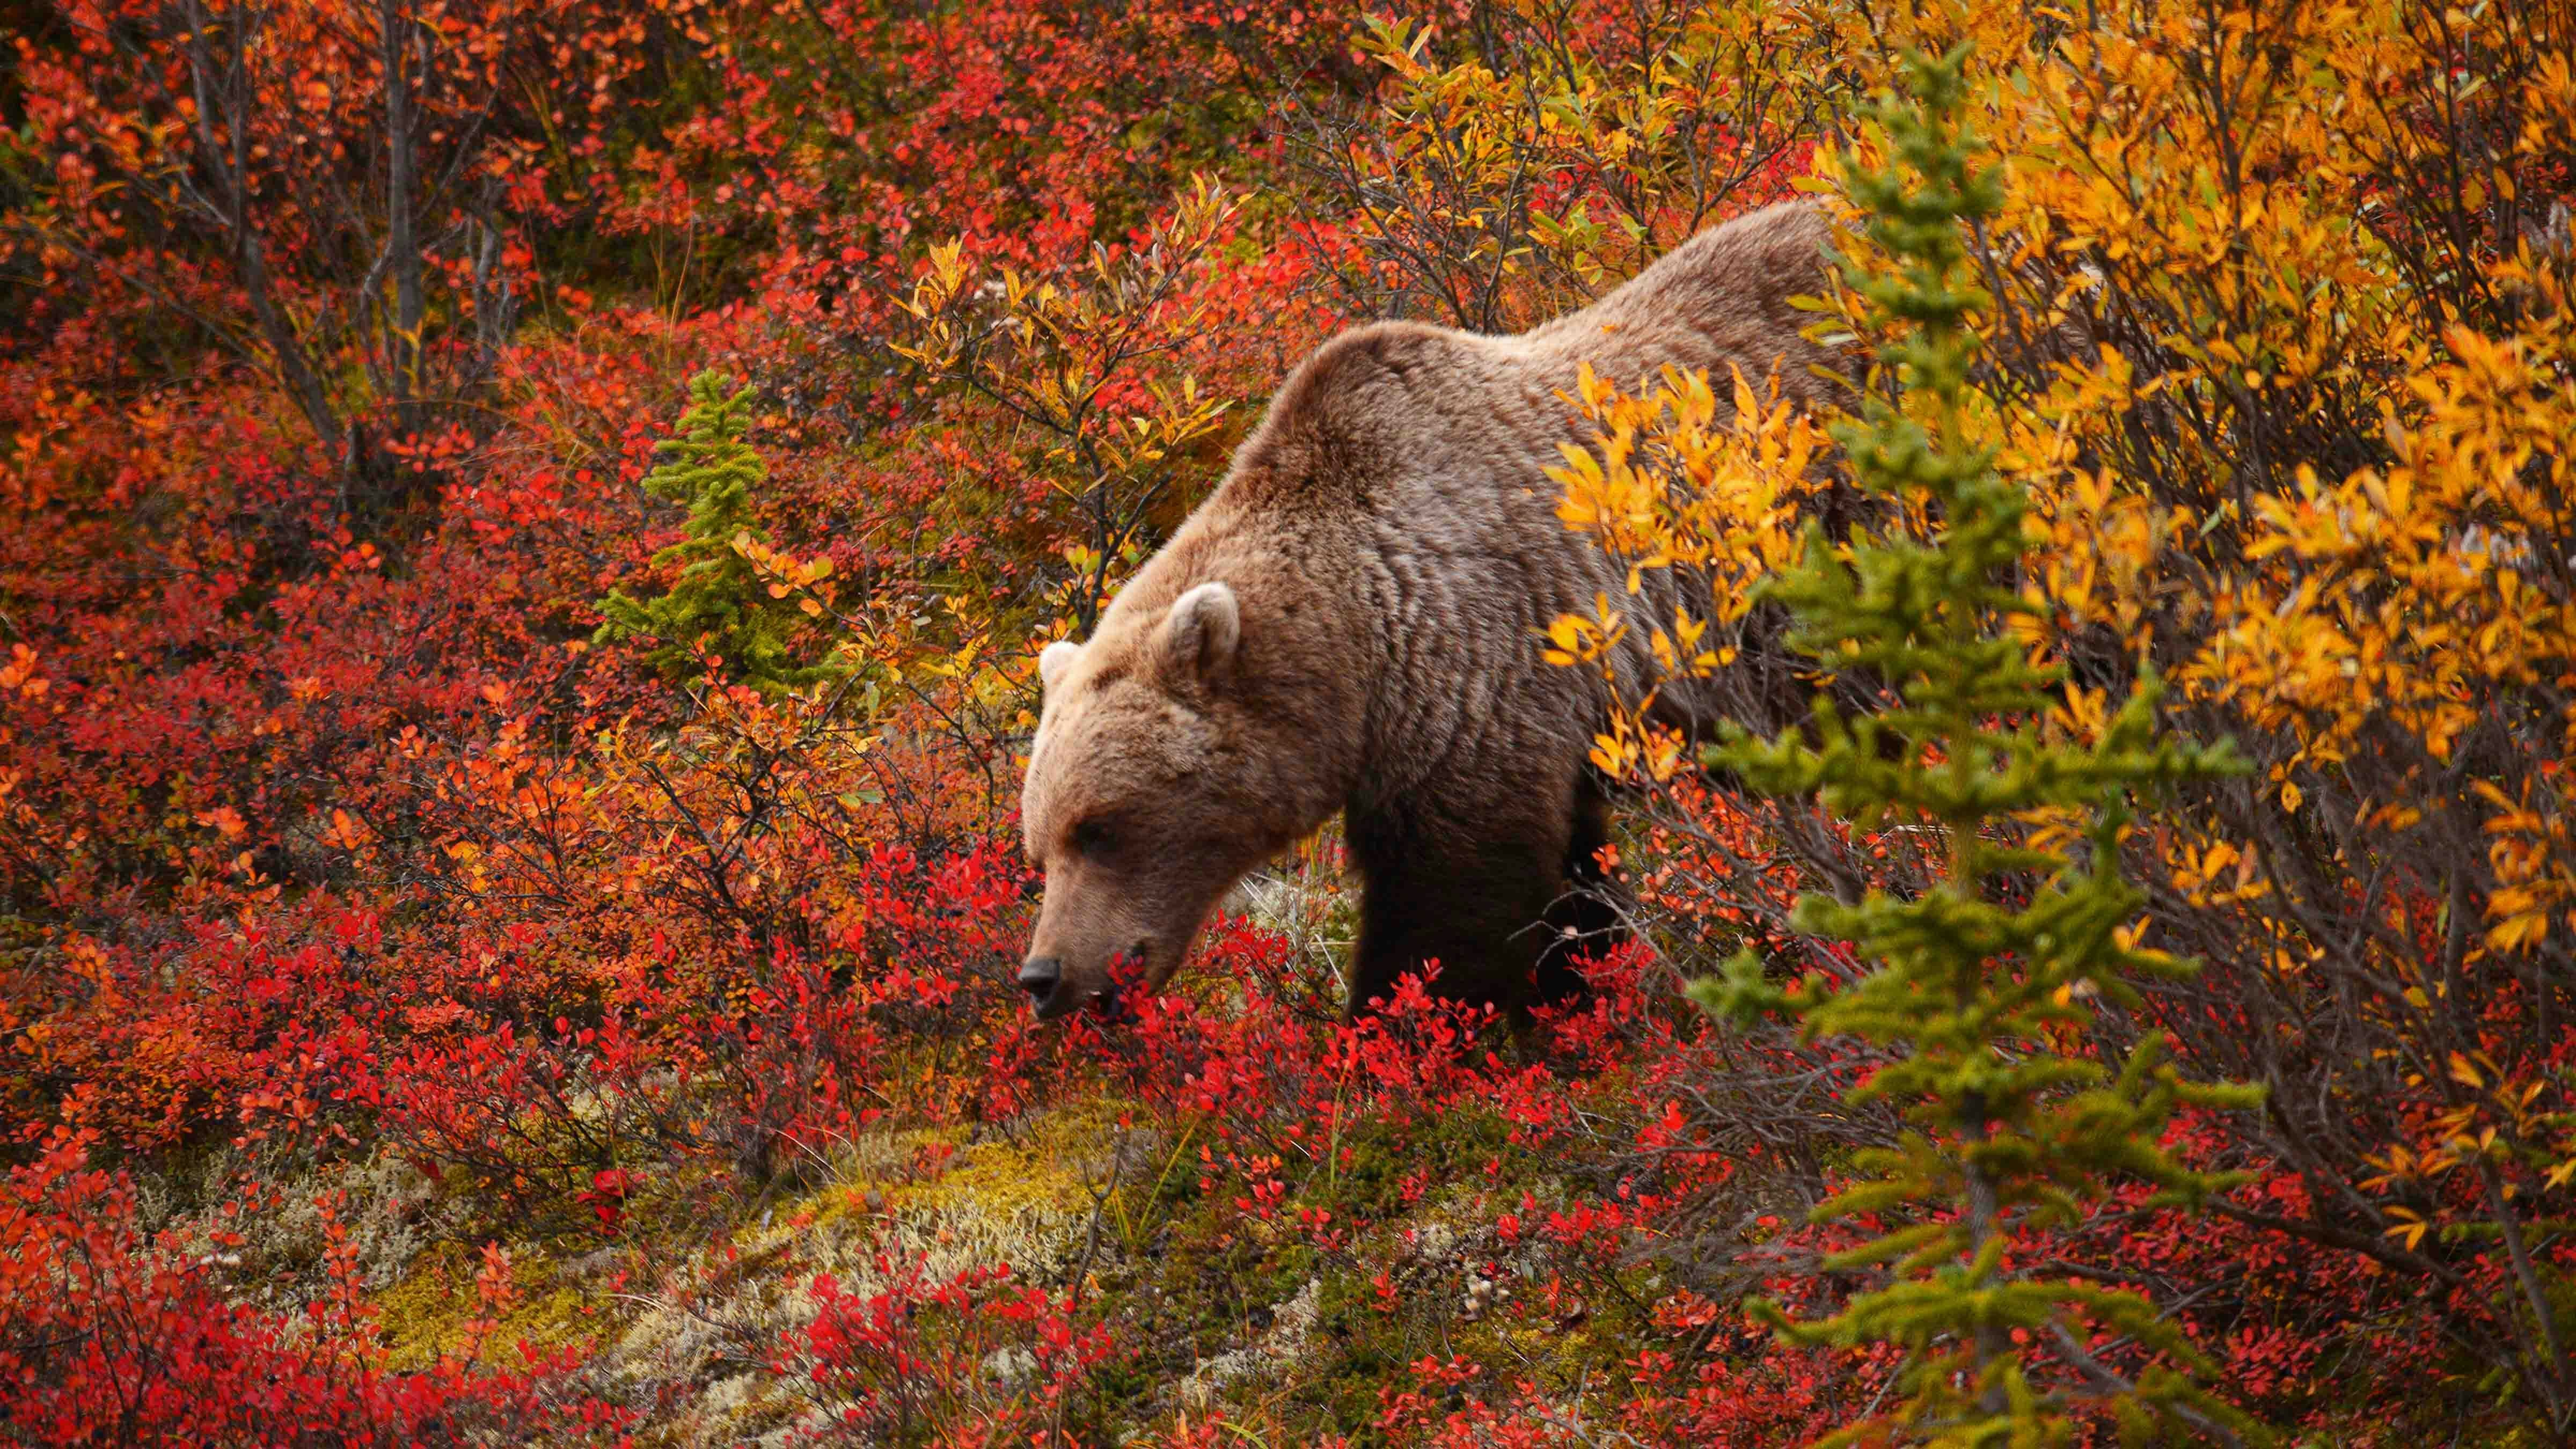 Grizzly in autumn 11 19 23